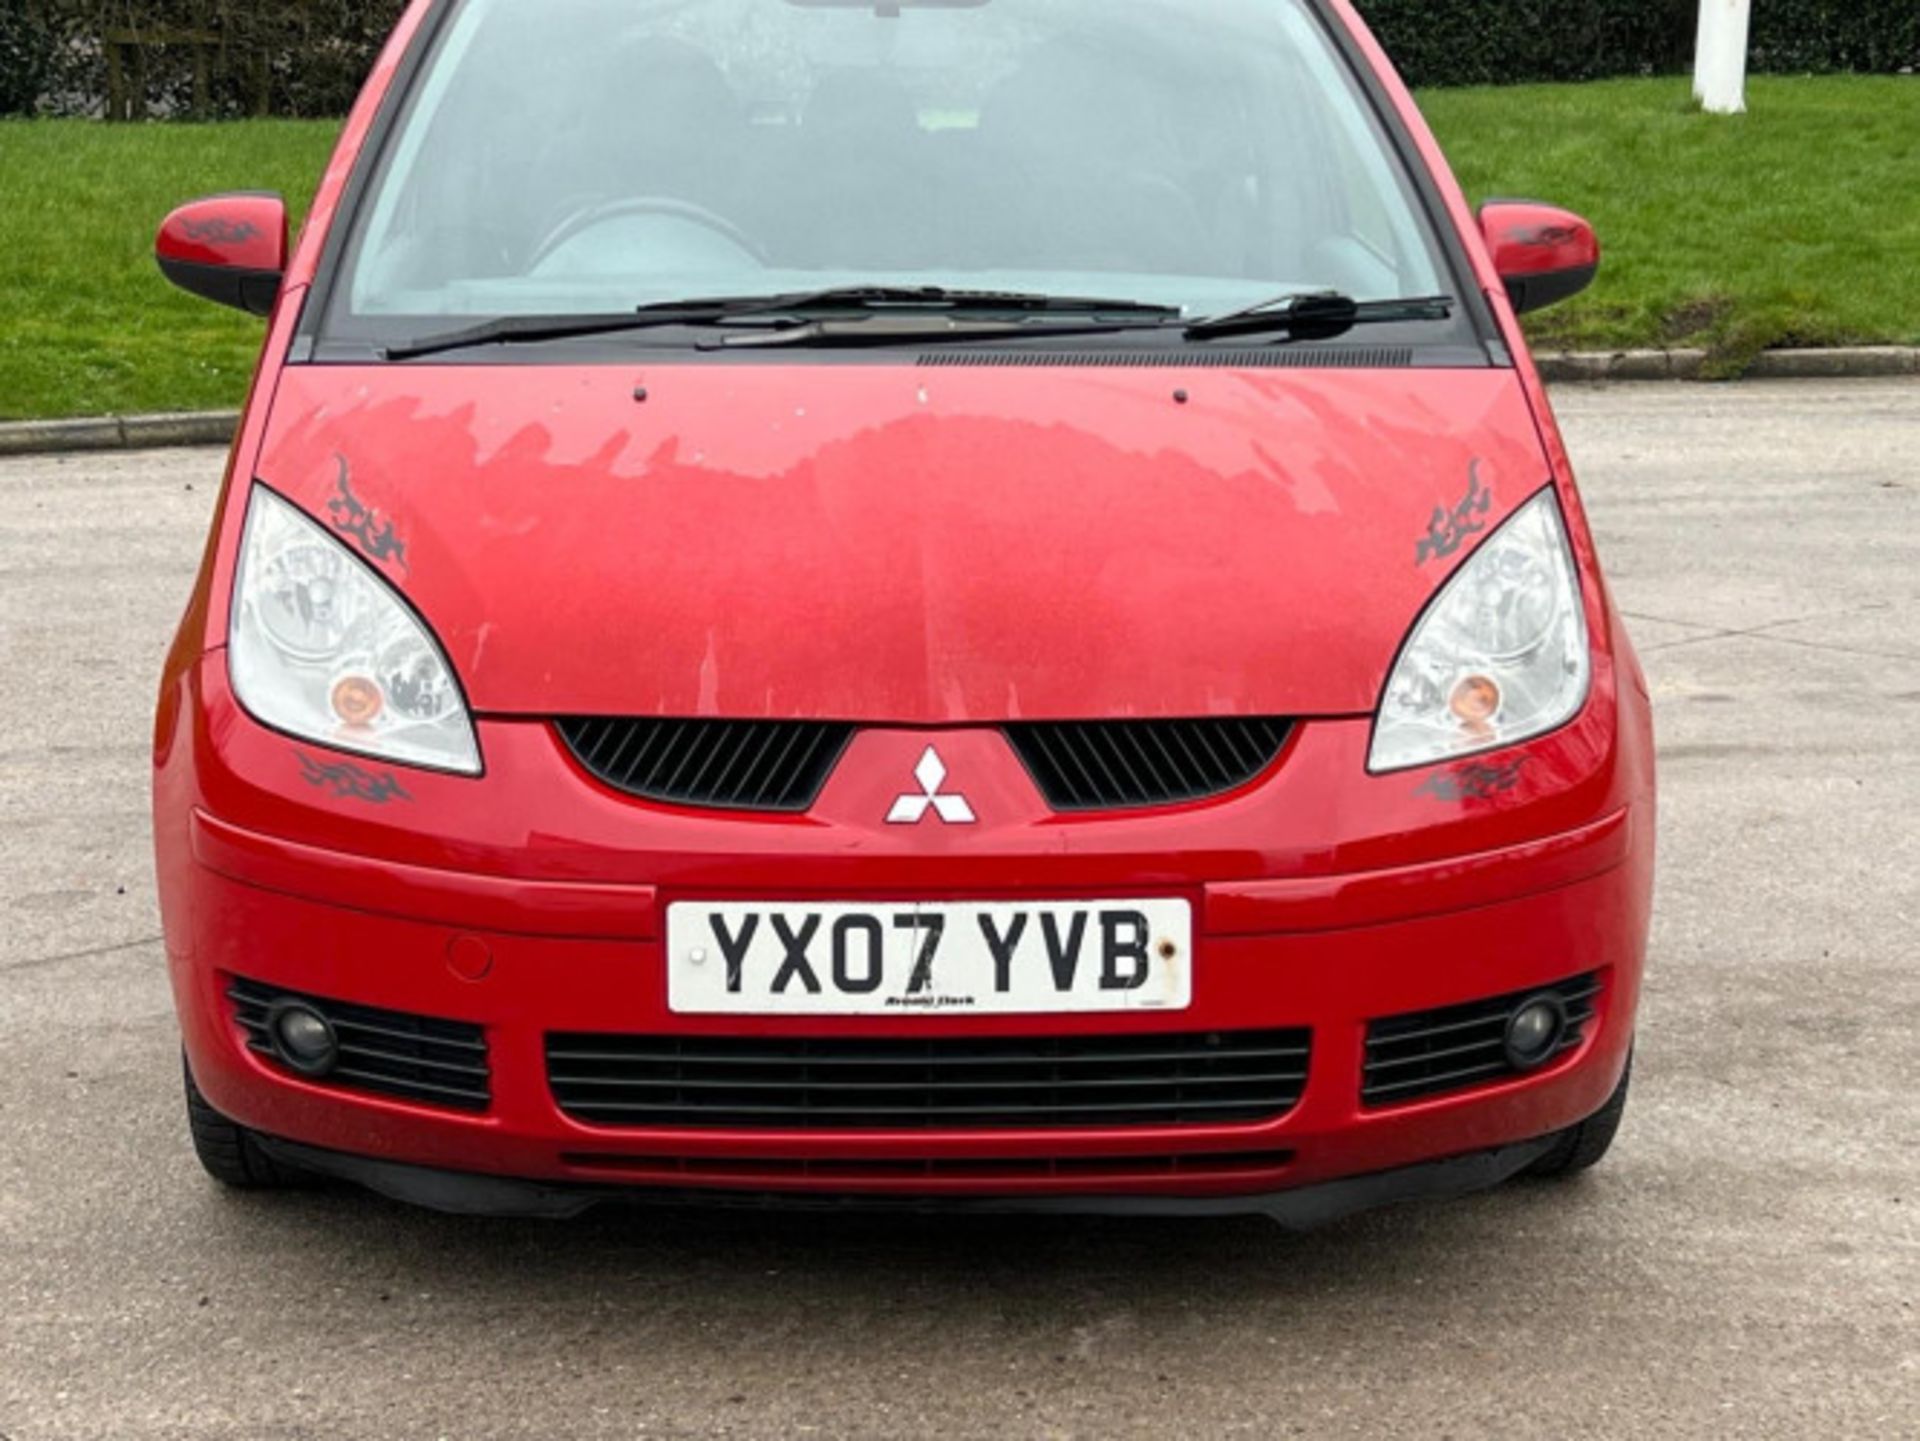 2007 MITSUBISHI COLT 1.5 DI-D DIESEL AUTOMATIC >>--NO VAT ON HAMMER--<< - Image 154 of 191